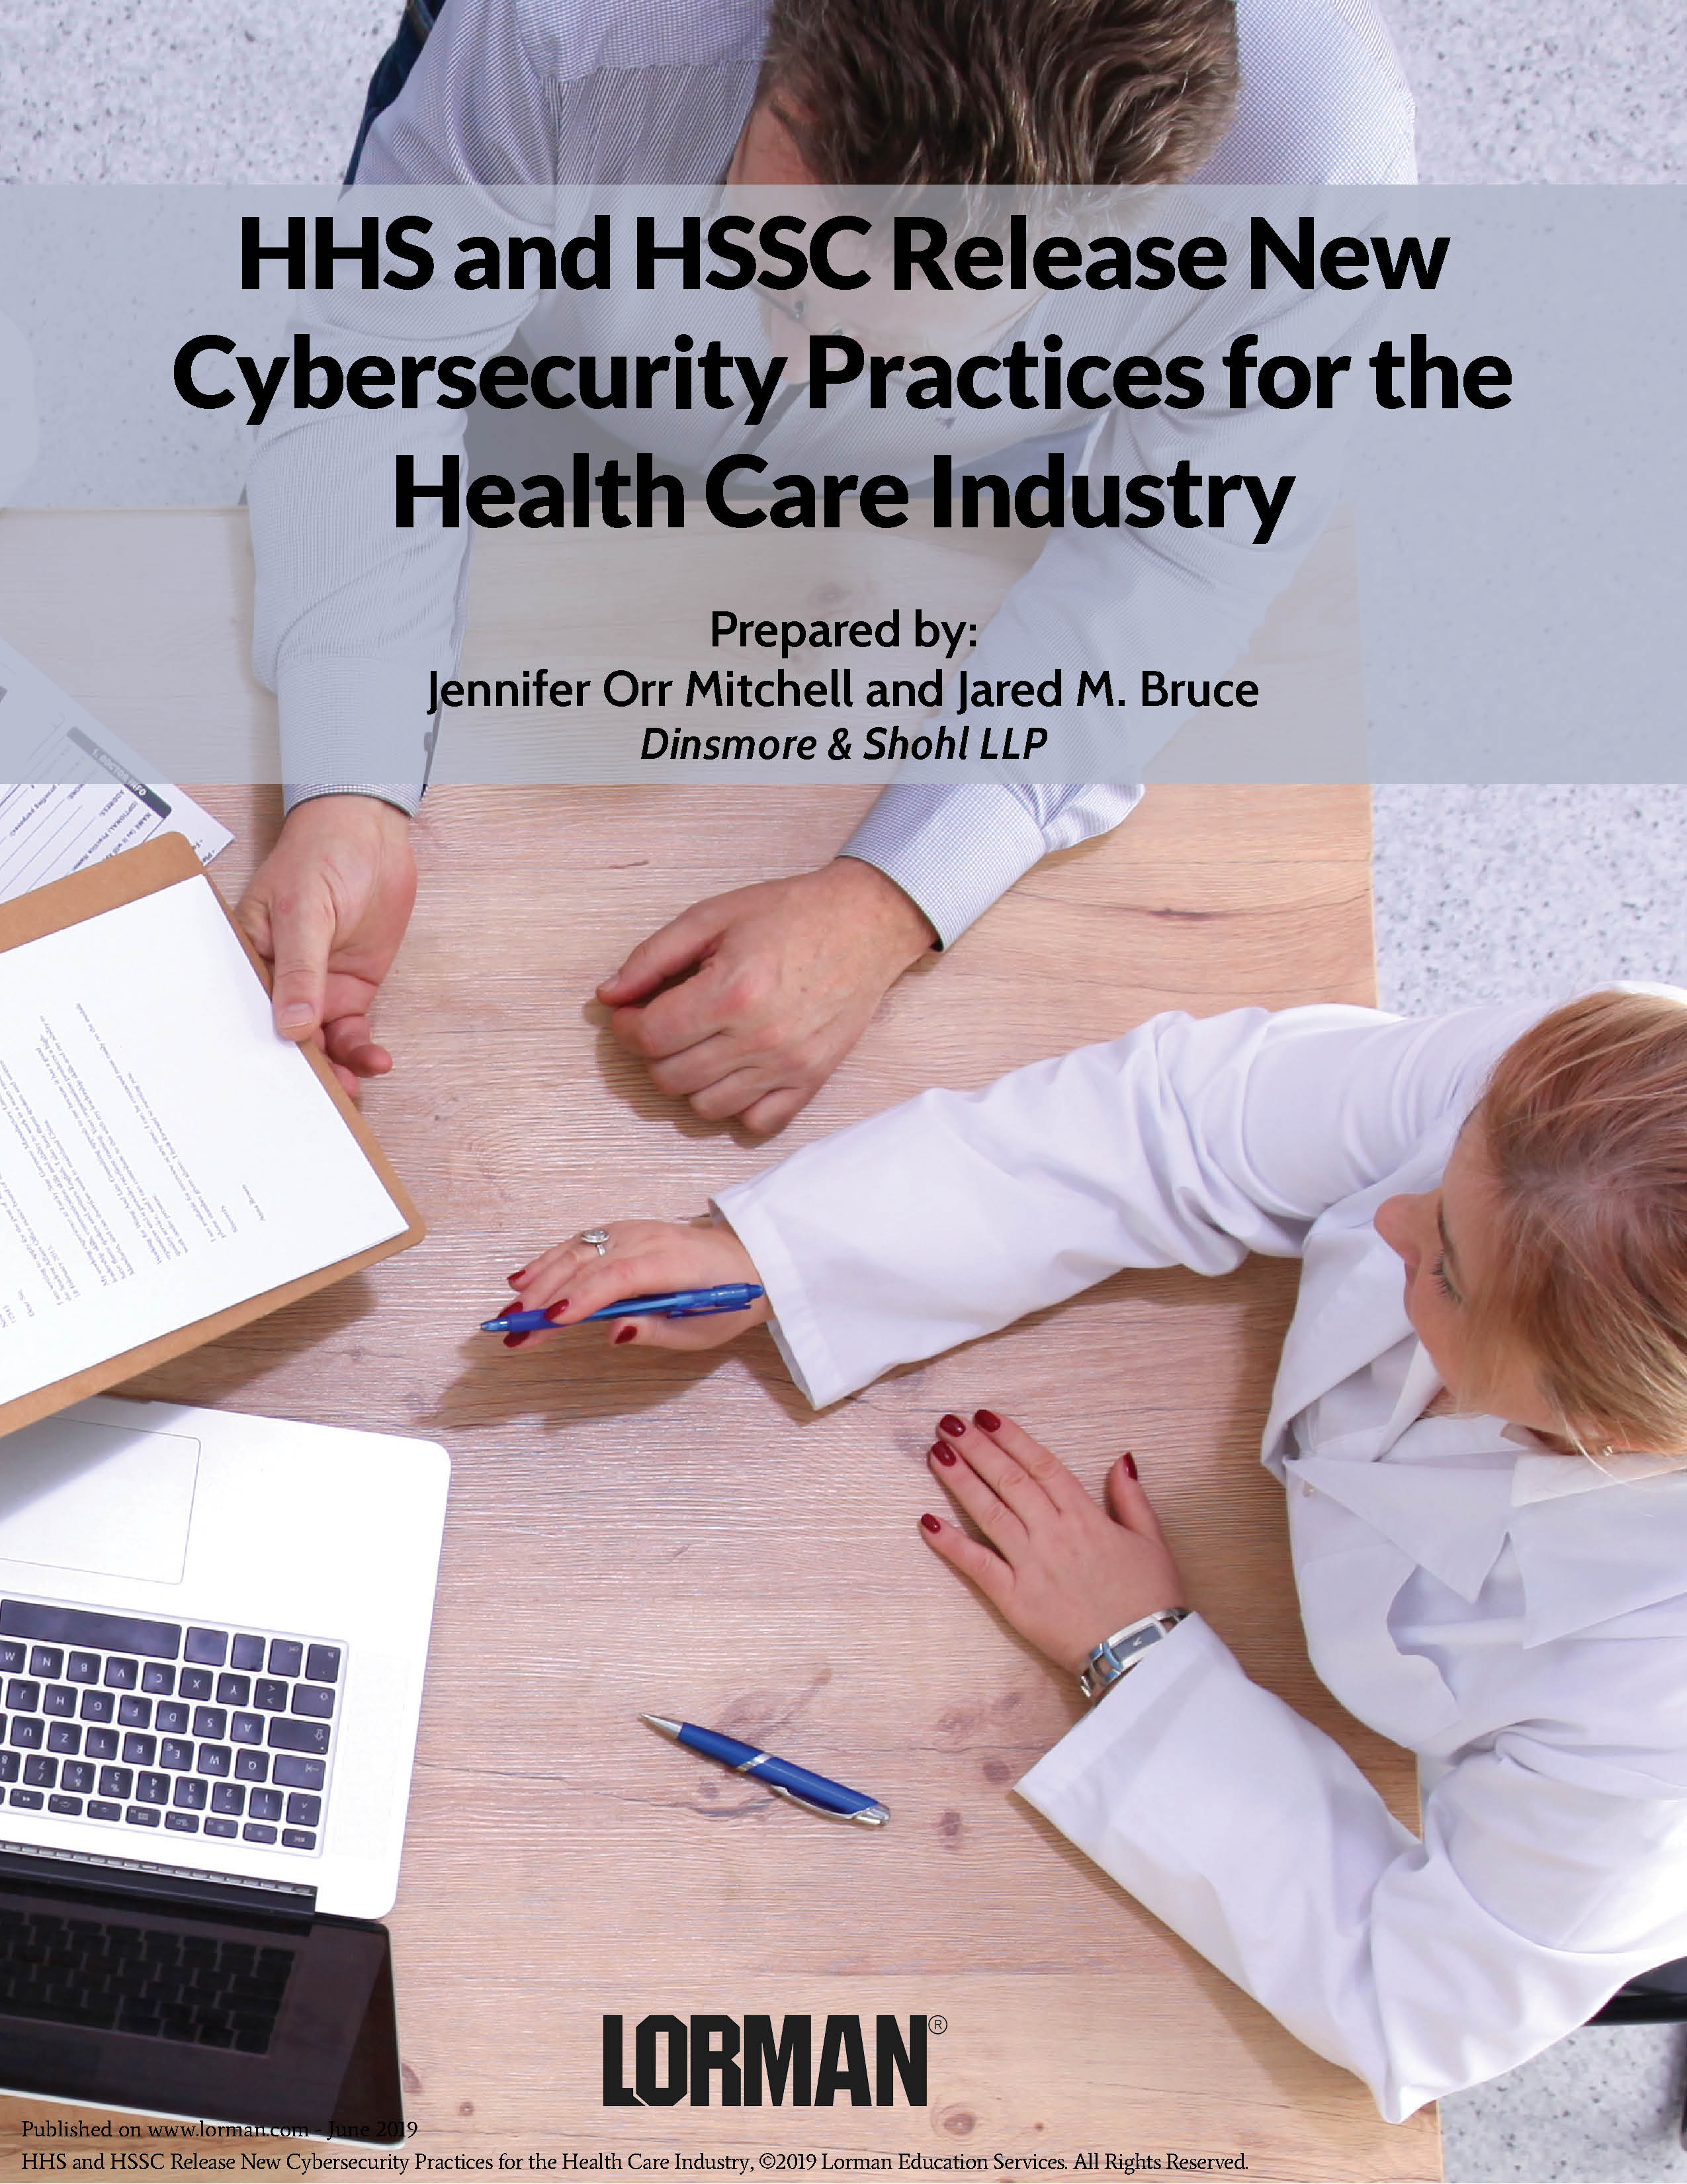 HHS and HSSC Release New Cybersecurity Practices for the Health Care Industry